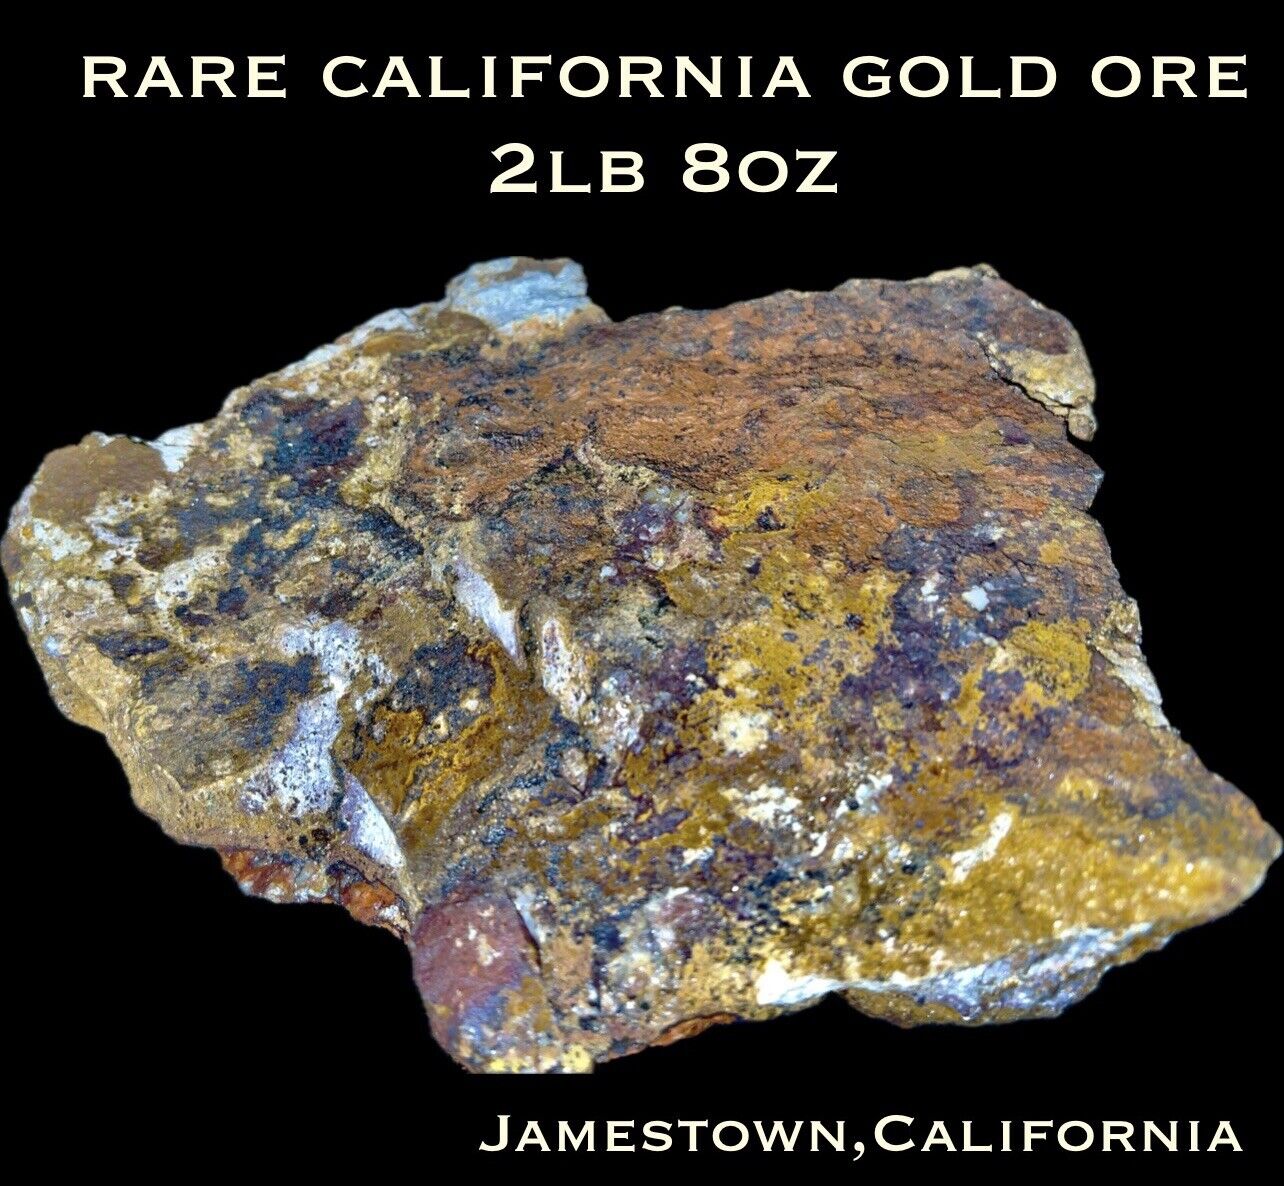 NATURAL-RAW-HIGHLY MINERALIZED-HIGH GRADE-RARE-GOLD ORE FROM THE MOTHERLODE